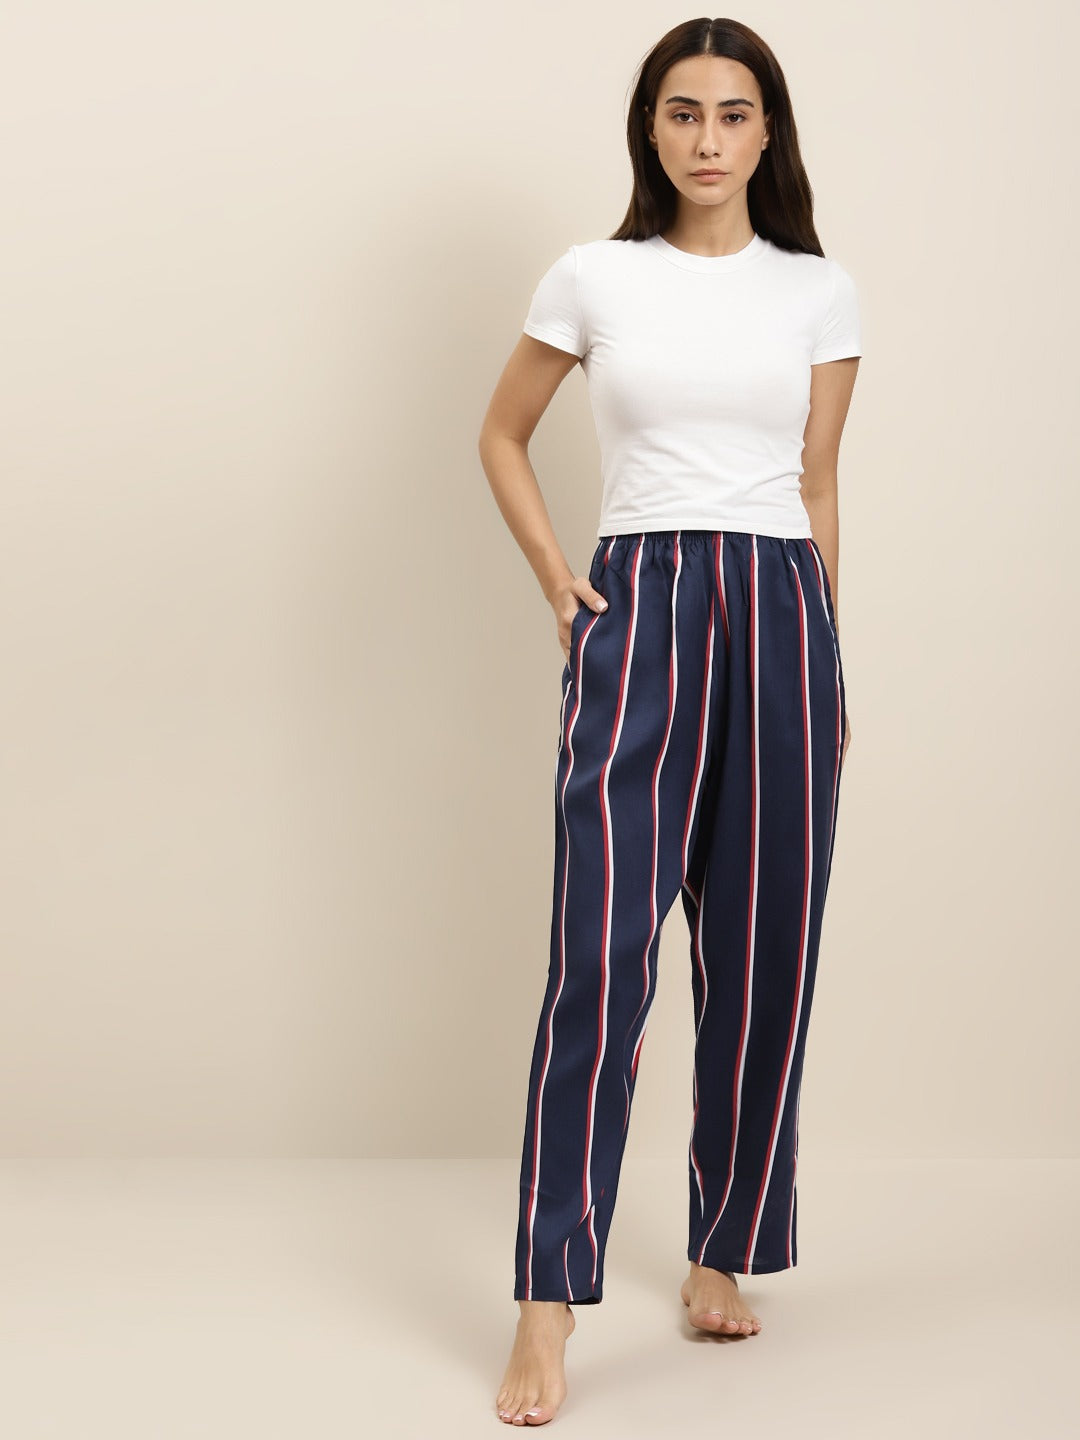 Women Navy Stripes Viscose Rayon Relaxed Fit Casual Lounge Pant